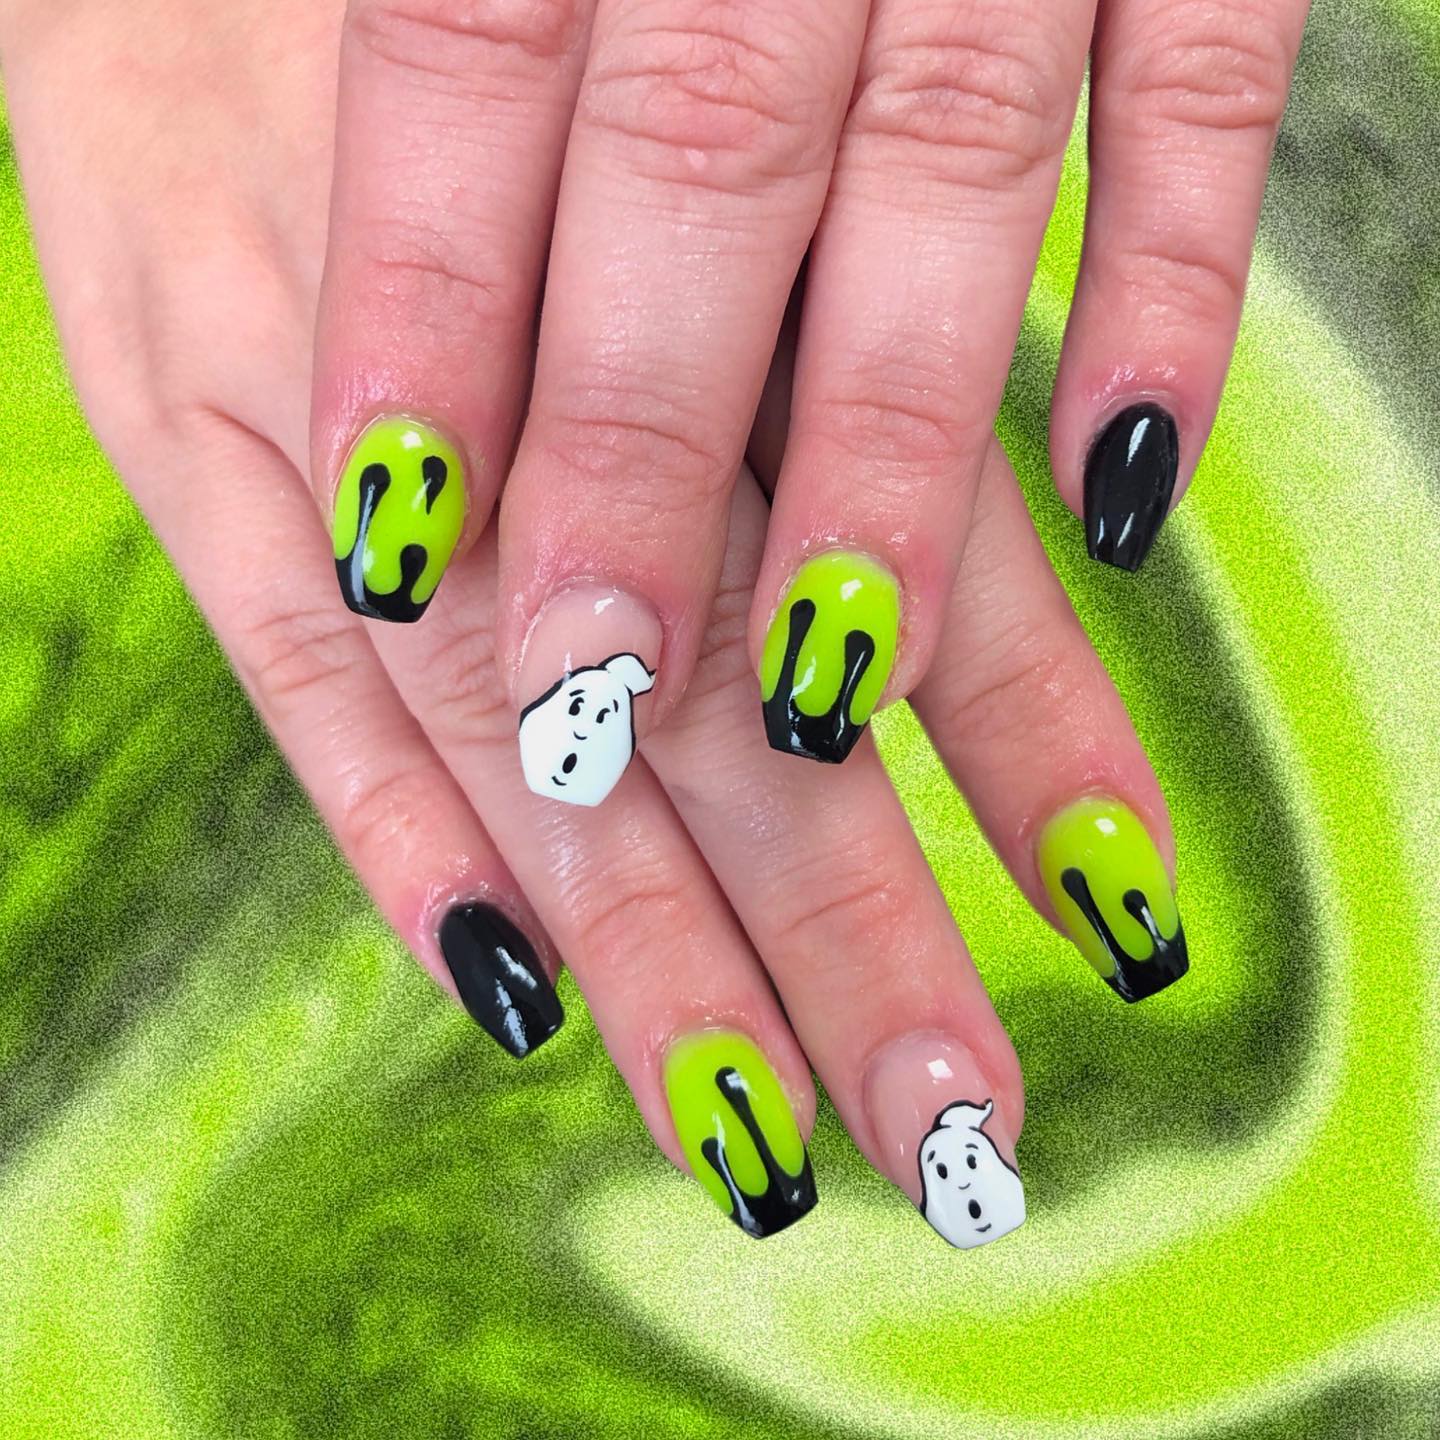 Ghostbusters and Nickelodeon Slime Design